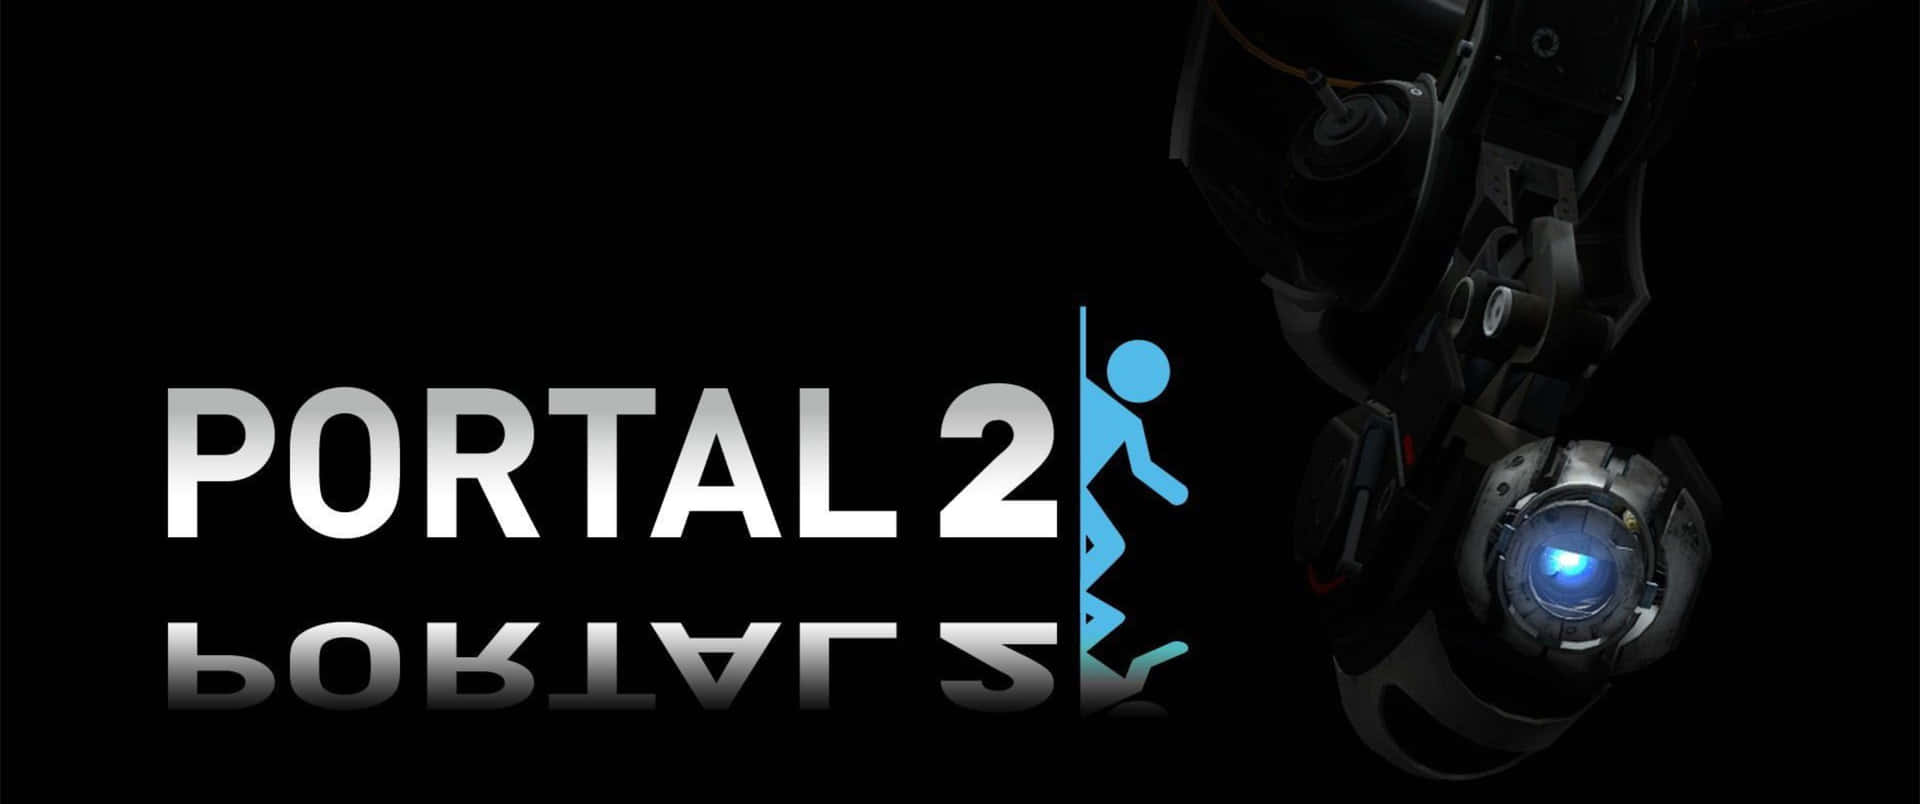 Enjoy the world of Aperture Science in Portal 2 with this beautiful 3440x1440p background